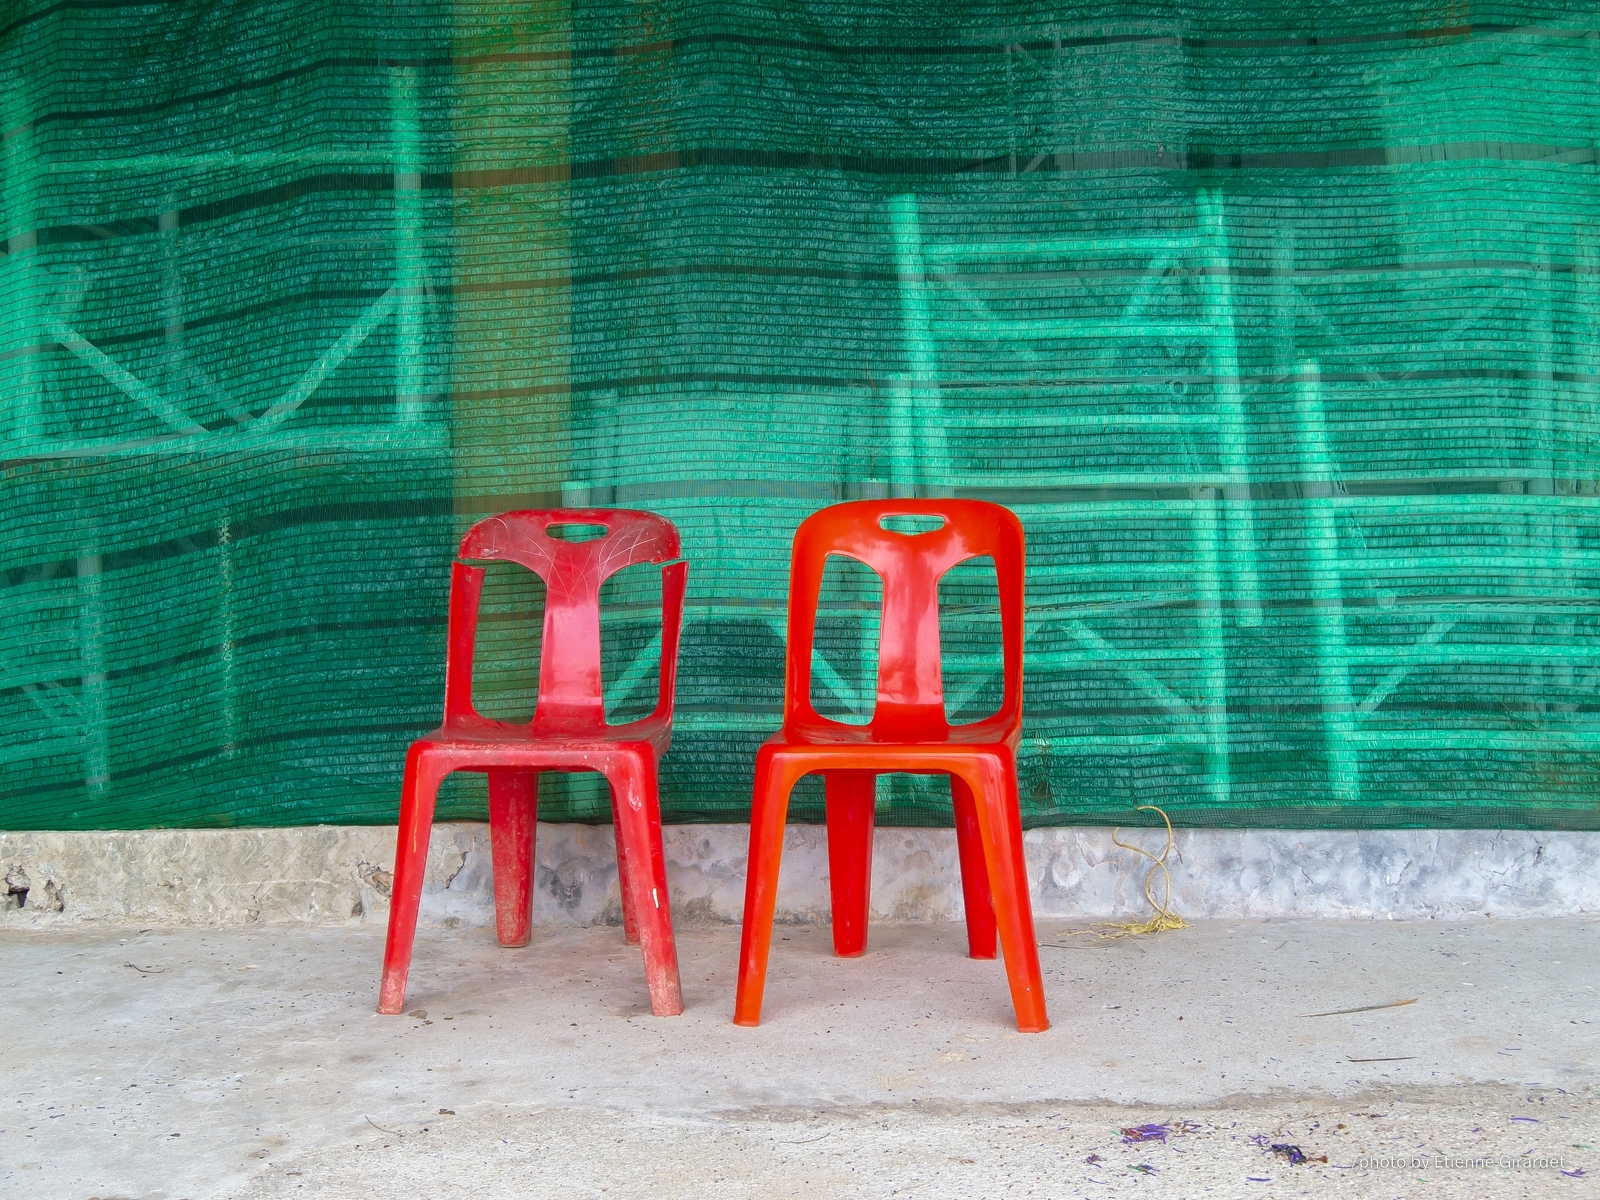 201404_28_IMG_0945-lonely-red-chairs-by-E-Girardet.jpg